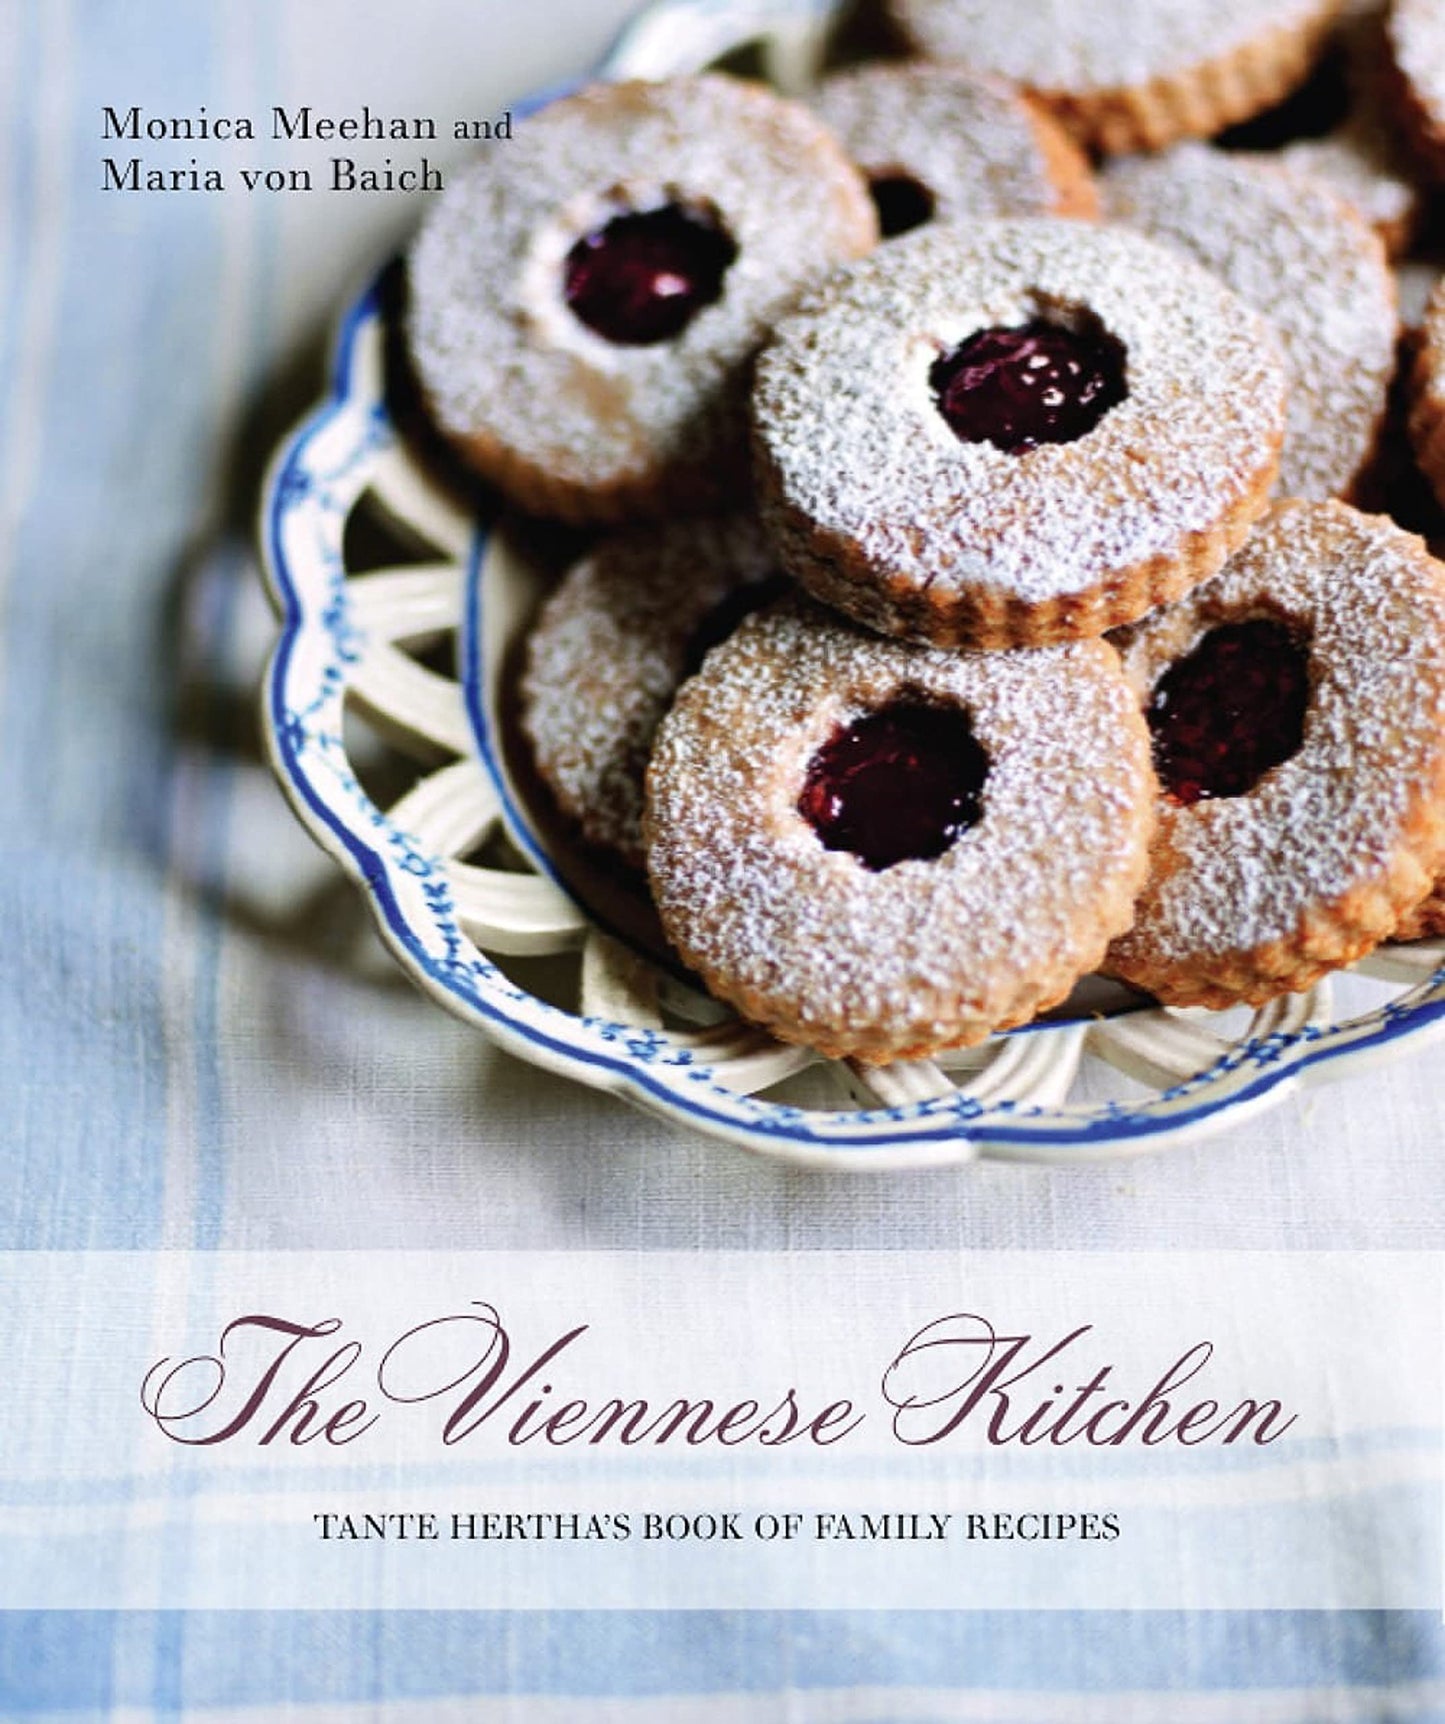 The Viennese Kitchen: 10th Anniversary Edition: Tante Hertha's Book of Family Recipes